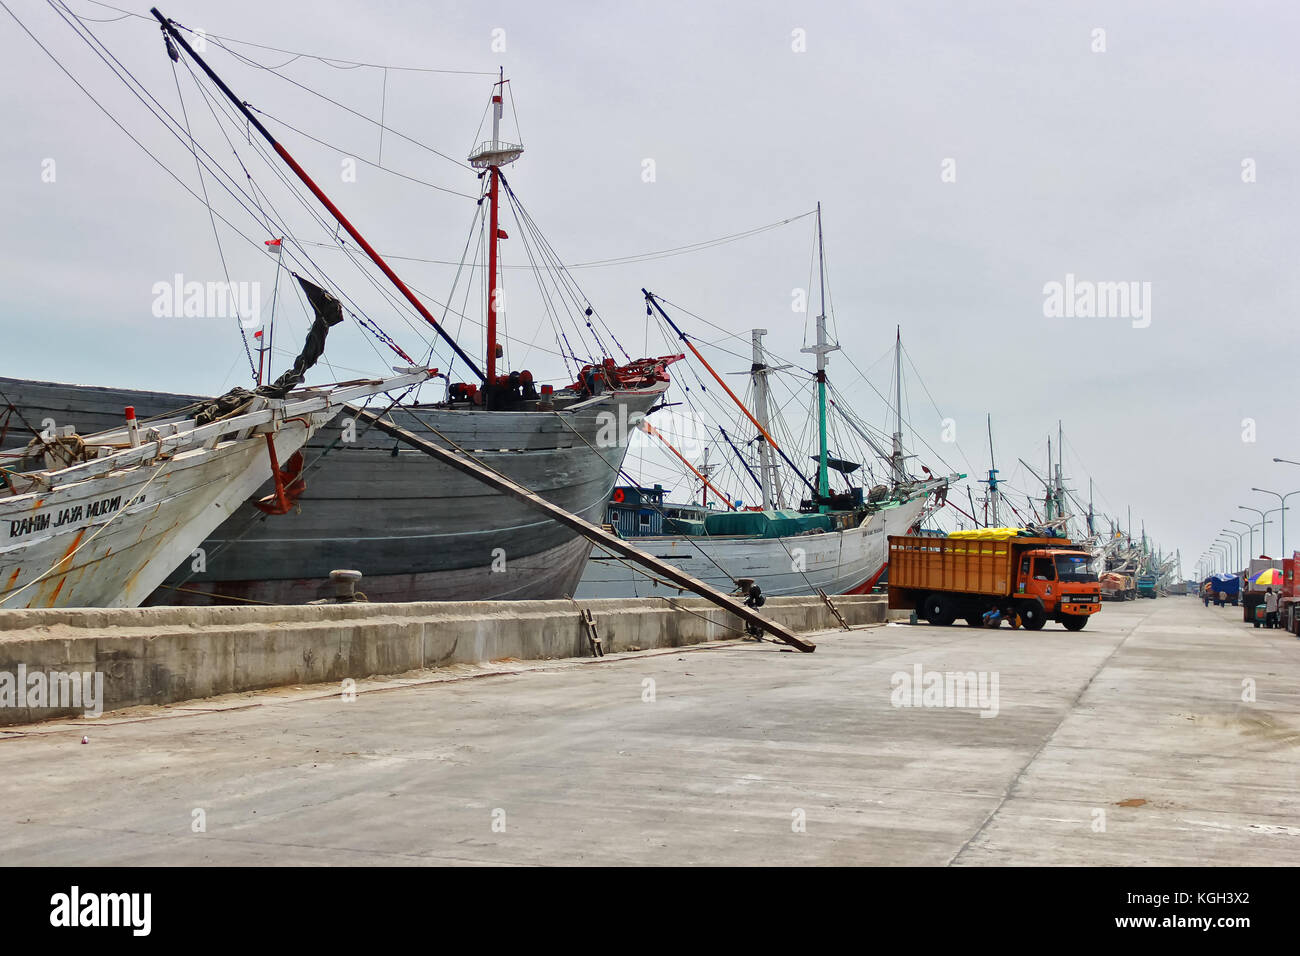 Phinisi ship in a harbor with trucks at the background in Jakarta, Indonesia. Stock Photo